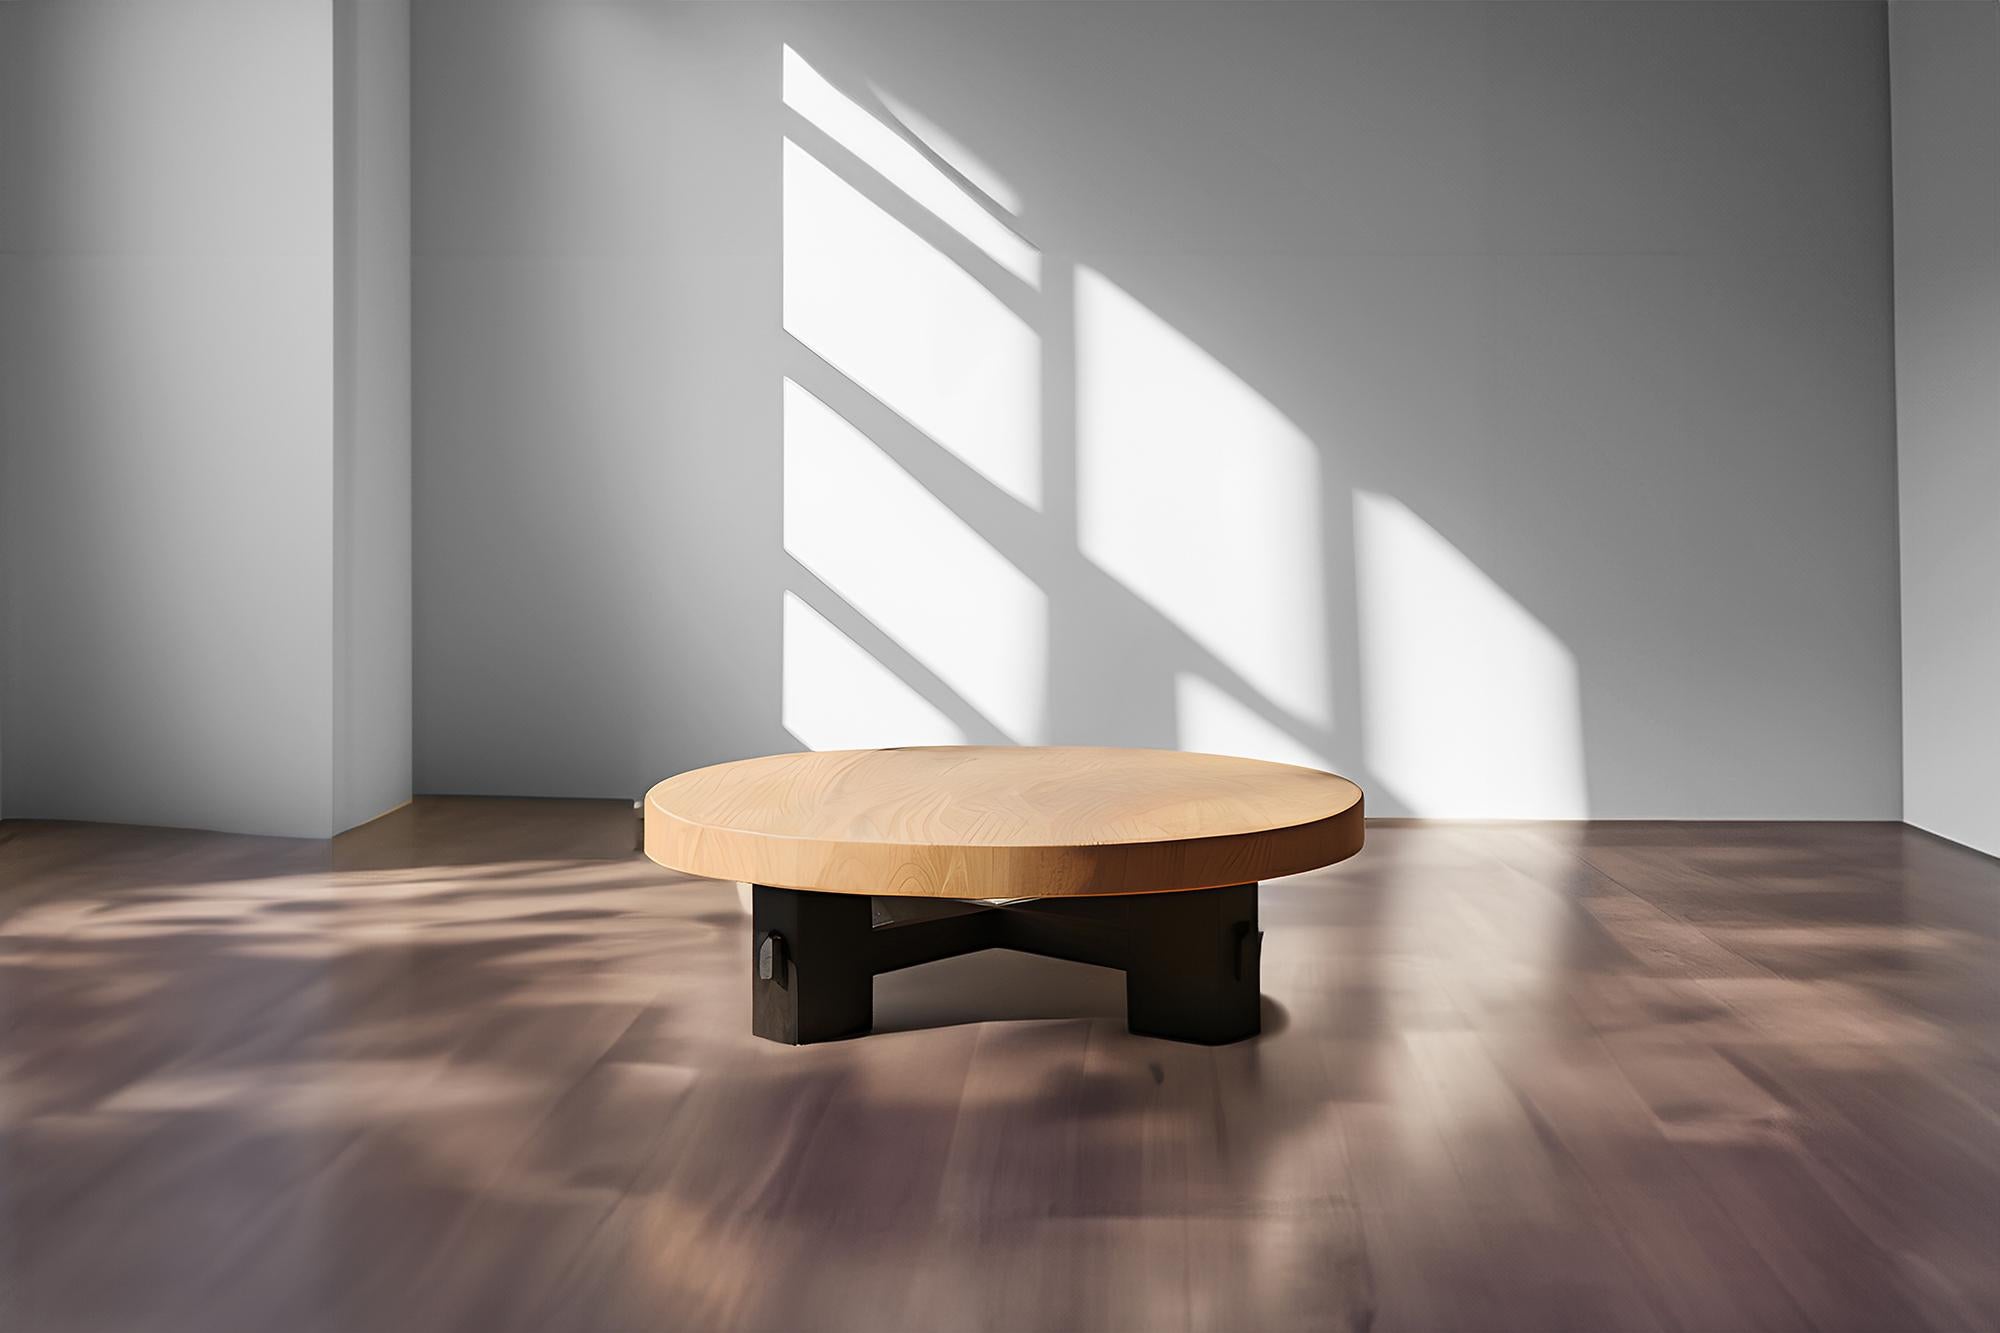 Low-profile Round Oak Table - Serene Fundamenta 36 by NONO

Sculptural coffee table made of solid wood with a natural water-based or black tinted finish. Due to the nature of the production process, each piece may vary in grain, texture, shape or